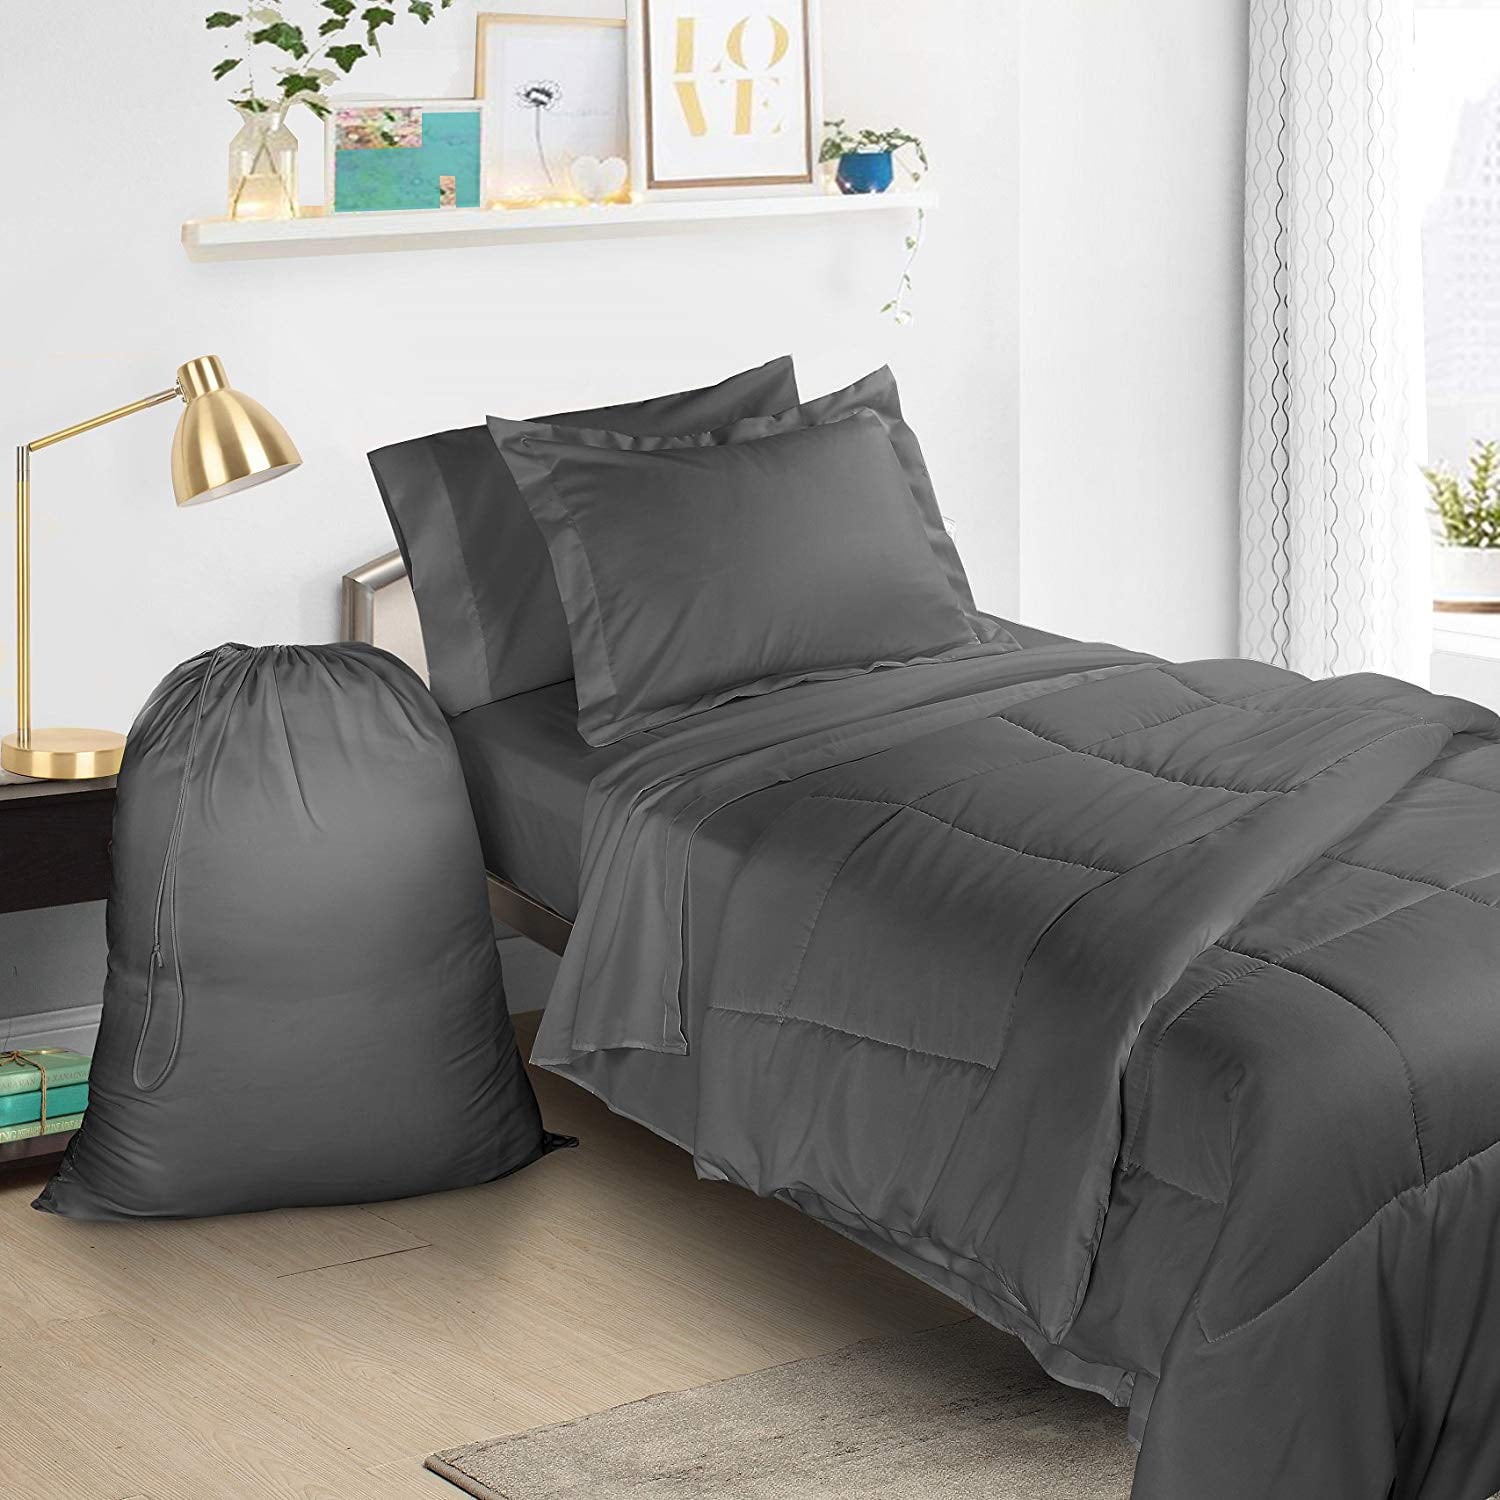 Includes Laundry Bag! College Dorm Twin XL Bed In a Bag 6 Piece Bedding Set 